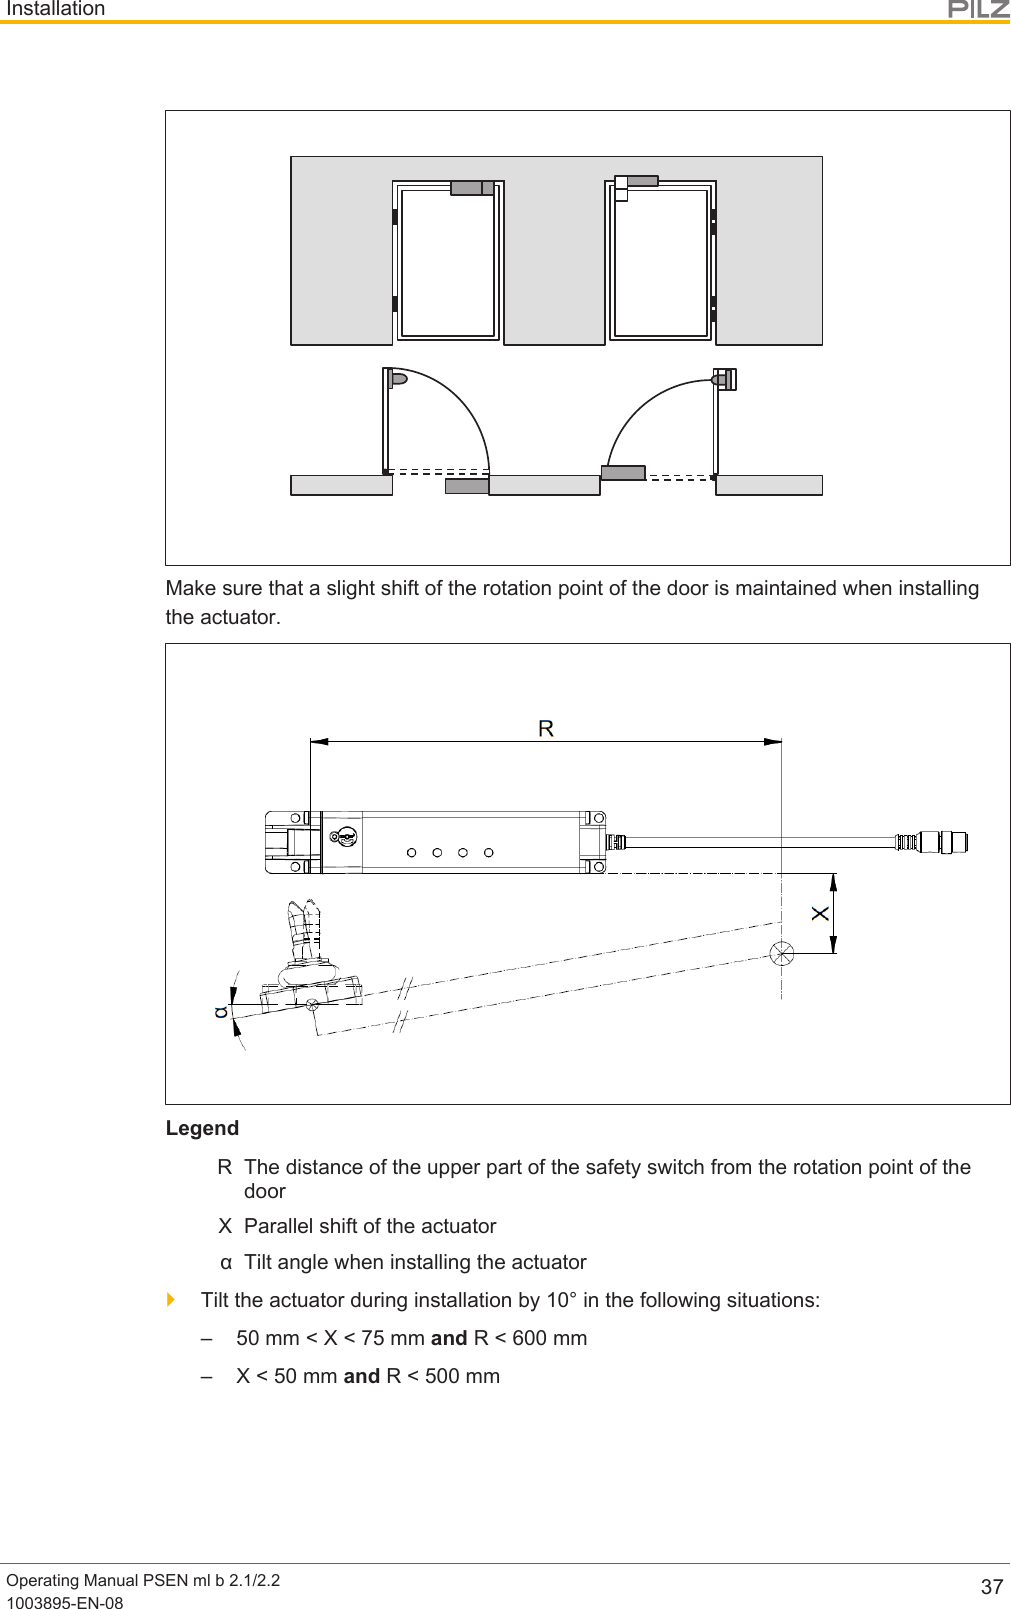 InstallationOperating Manual PSEN ml b 2.1/2.21003895-EN-08 37Make sure that a slight shift of the rotation point of the door is maintained when installingthe actuator.LegendR The distance of the upper part of the safety switch from the rotation point of thedoorX Parallel shift of the actuatorα Tilt angle when installing the actuator}Tilt the actuator during installation by 10° in the following situations:– 50 mm &lt; X &lt; 75 mm and R &lt; 600 mm– X &lt; 50 mm and R &lt; 500 mm